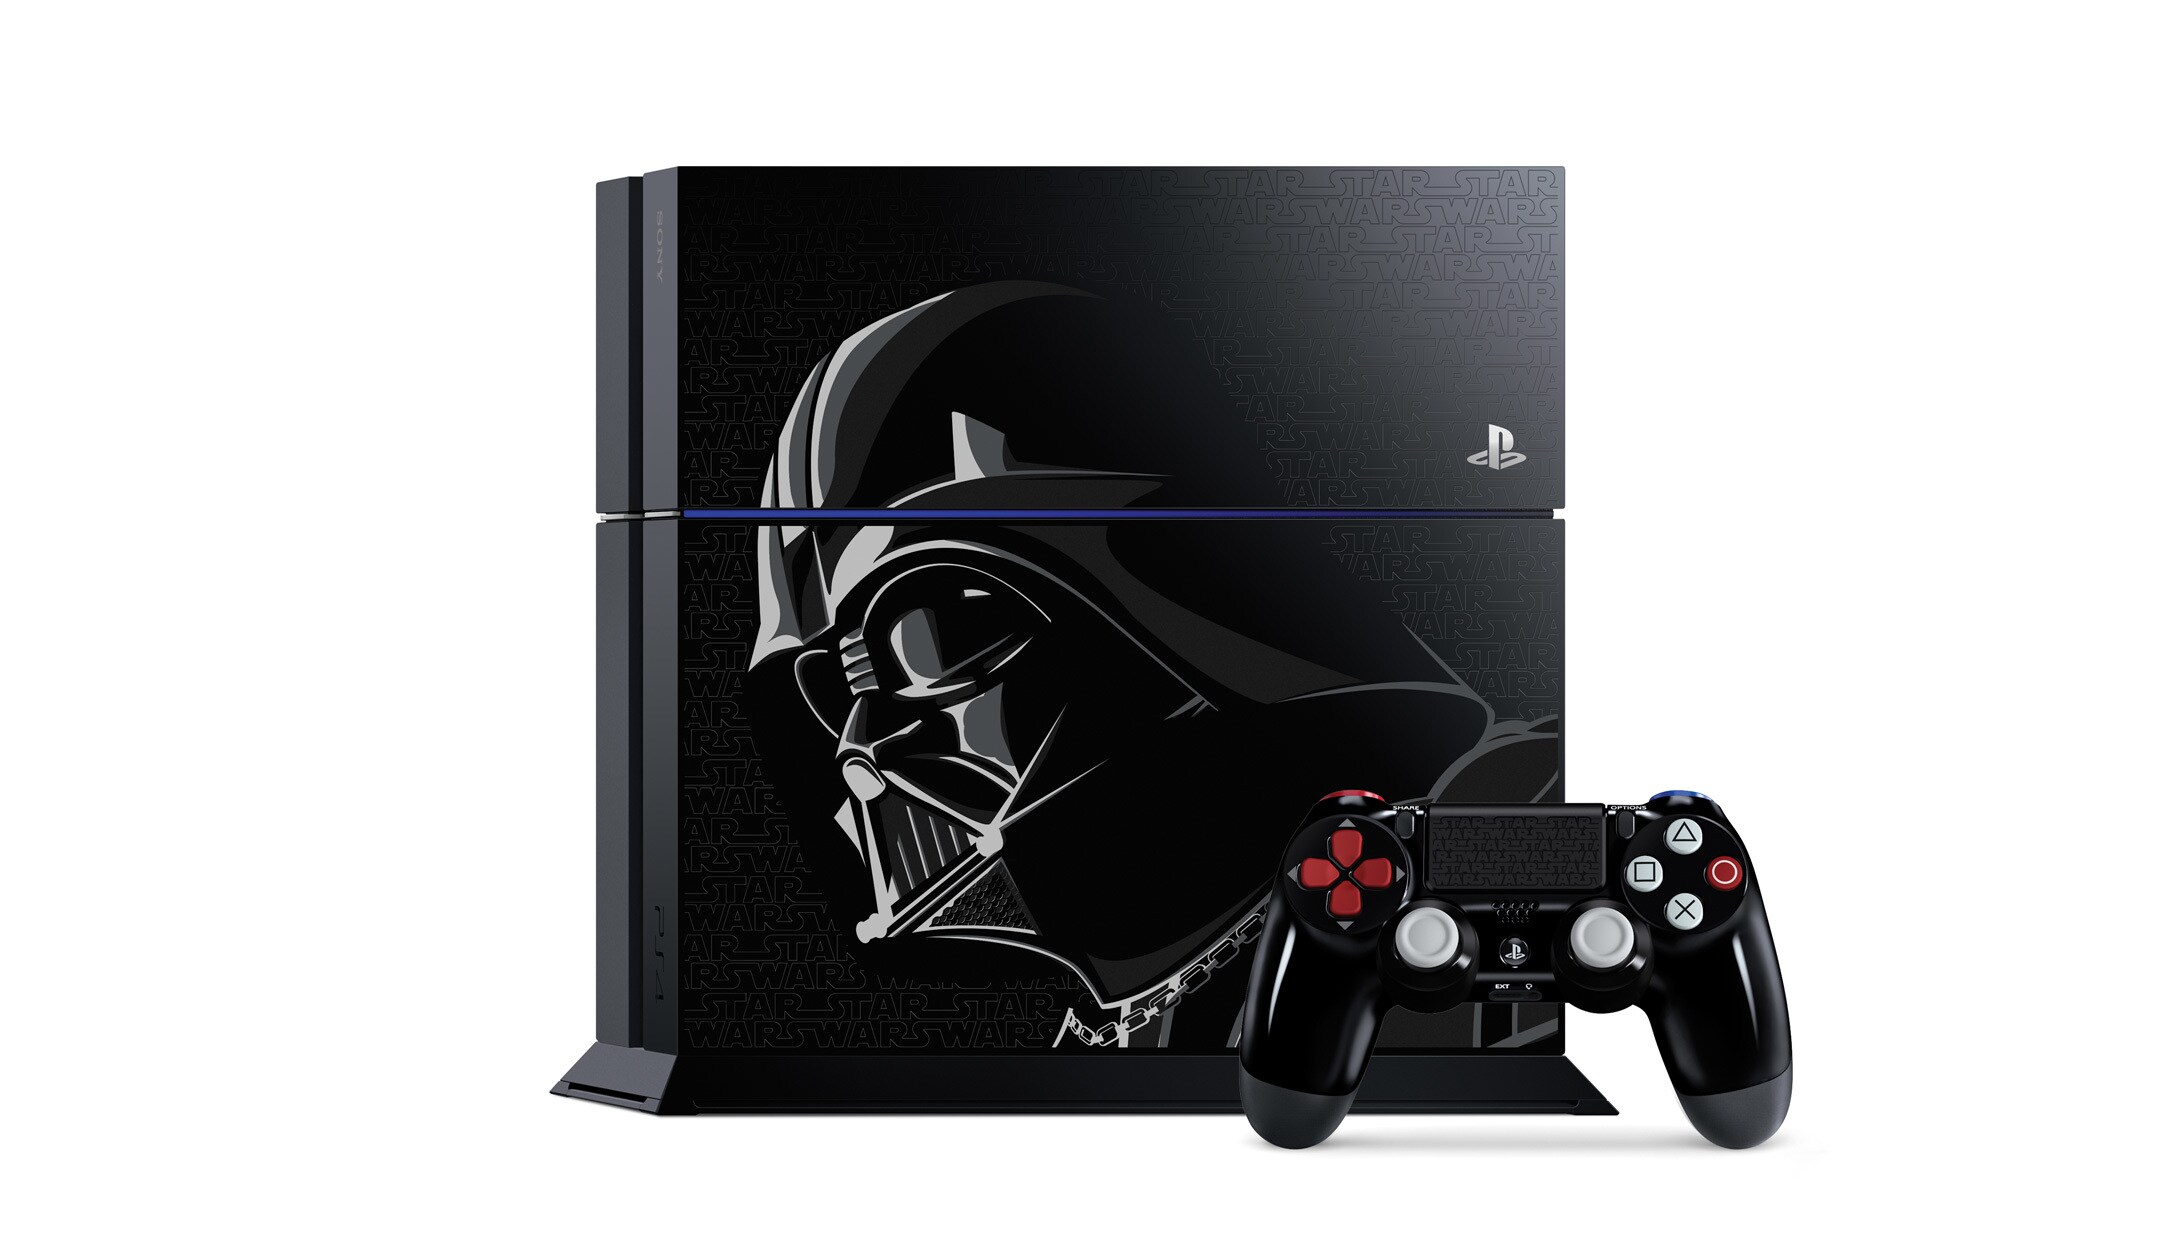 Ps4 ultimate edition. PLAYSTATION 4 1tb Star Wars Limited Edition. Sony PLAYSTATION 4 Pro Star Wars. Sony ps4 Star Wars Console. Ps4 Darth Vader Edition.